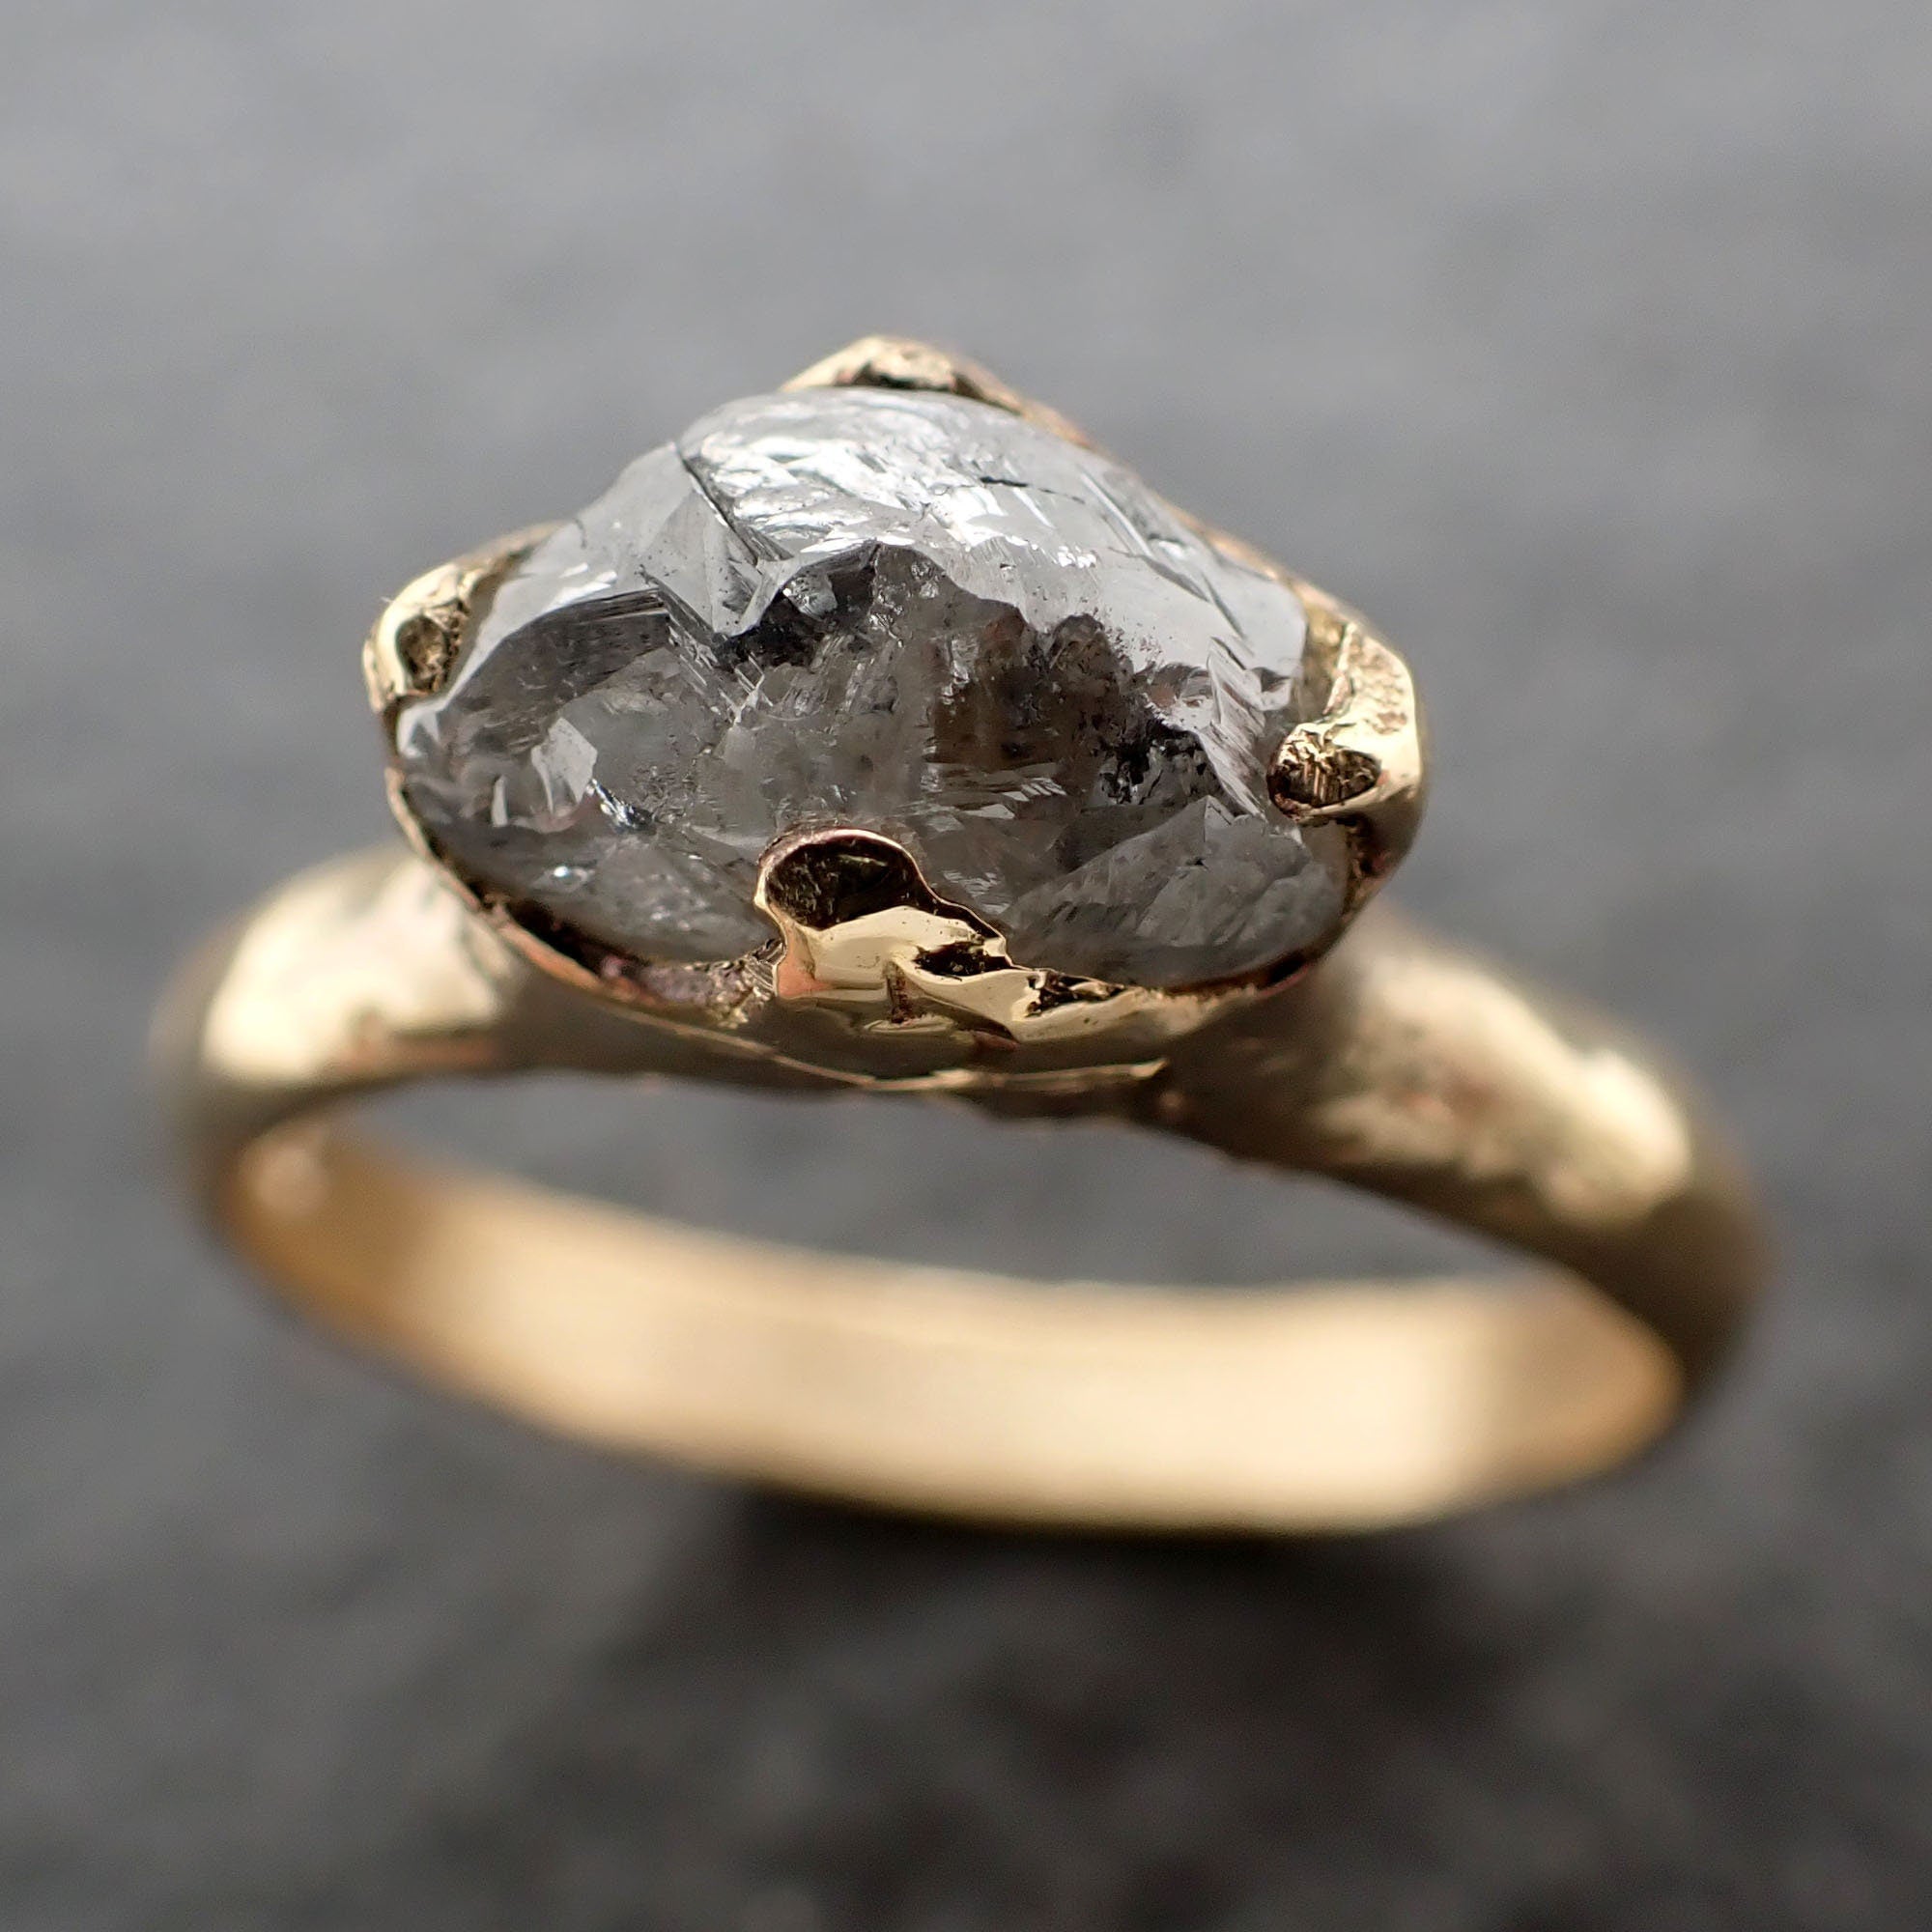 14K Gold Raw Diamond Ring For Sale Available Online At Cheap Price